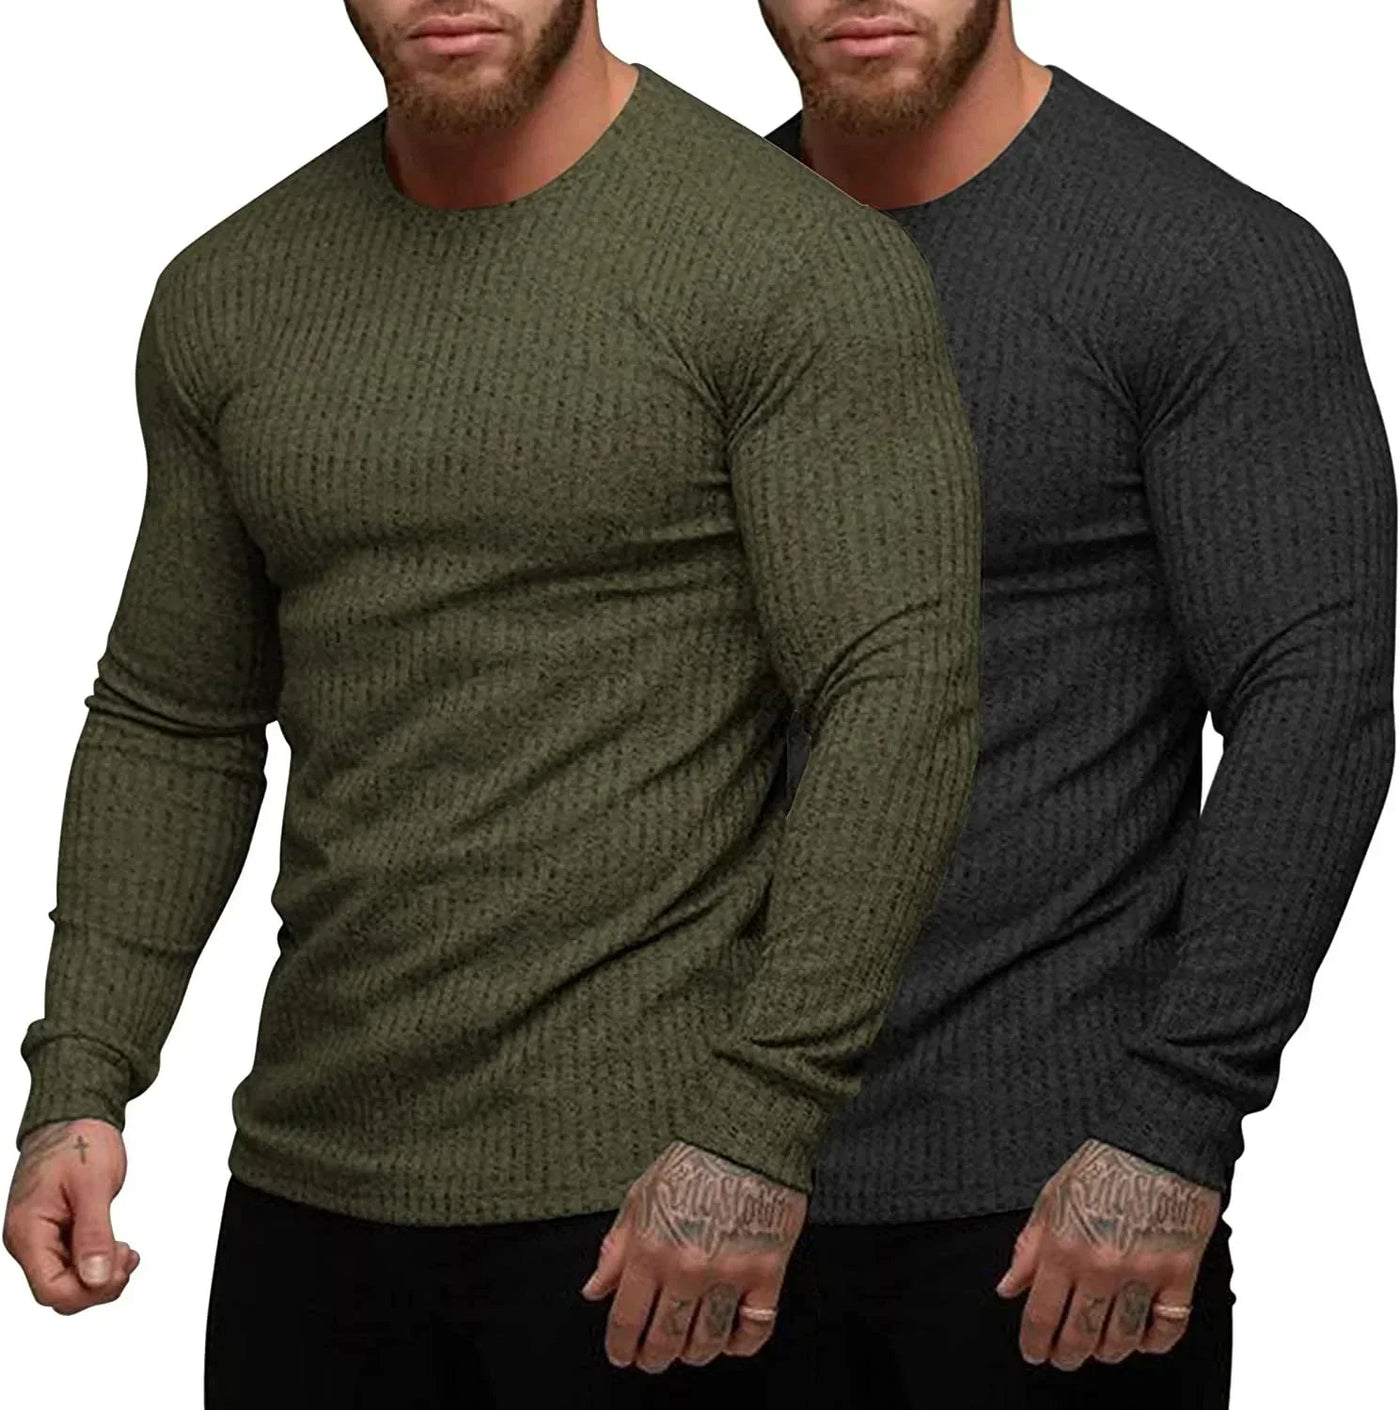 2-Pack Stretch Gym Bodybuilding T-Shirt (US Only) T-Shirt COOFANDY Store Black/Army Green M 